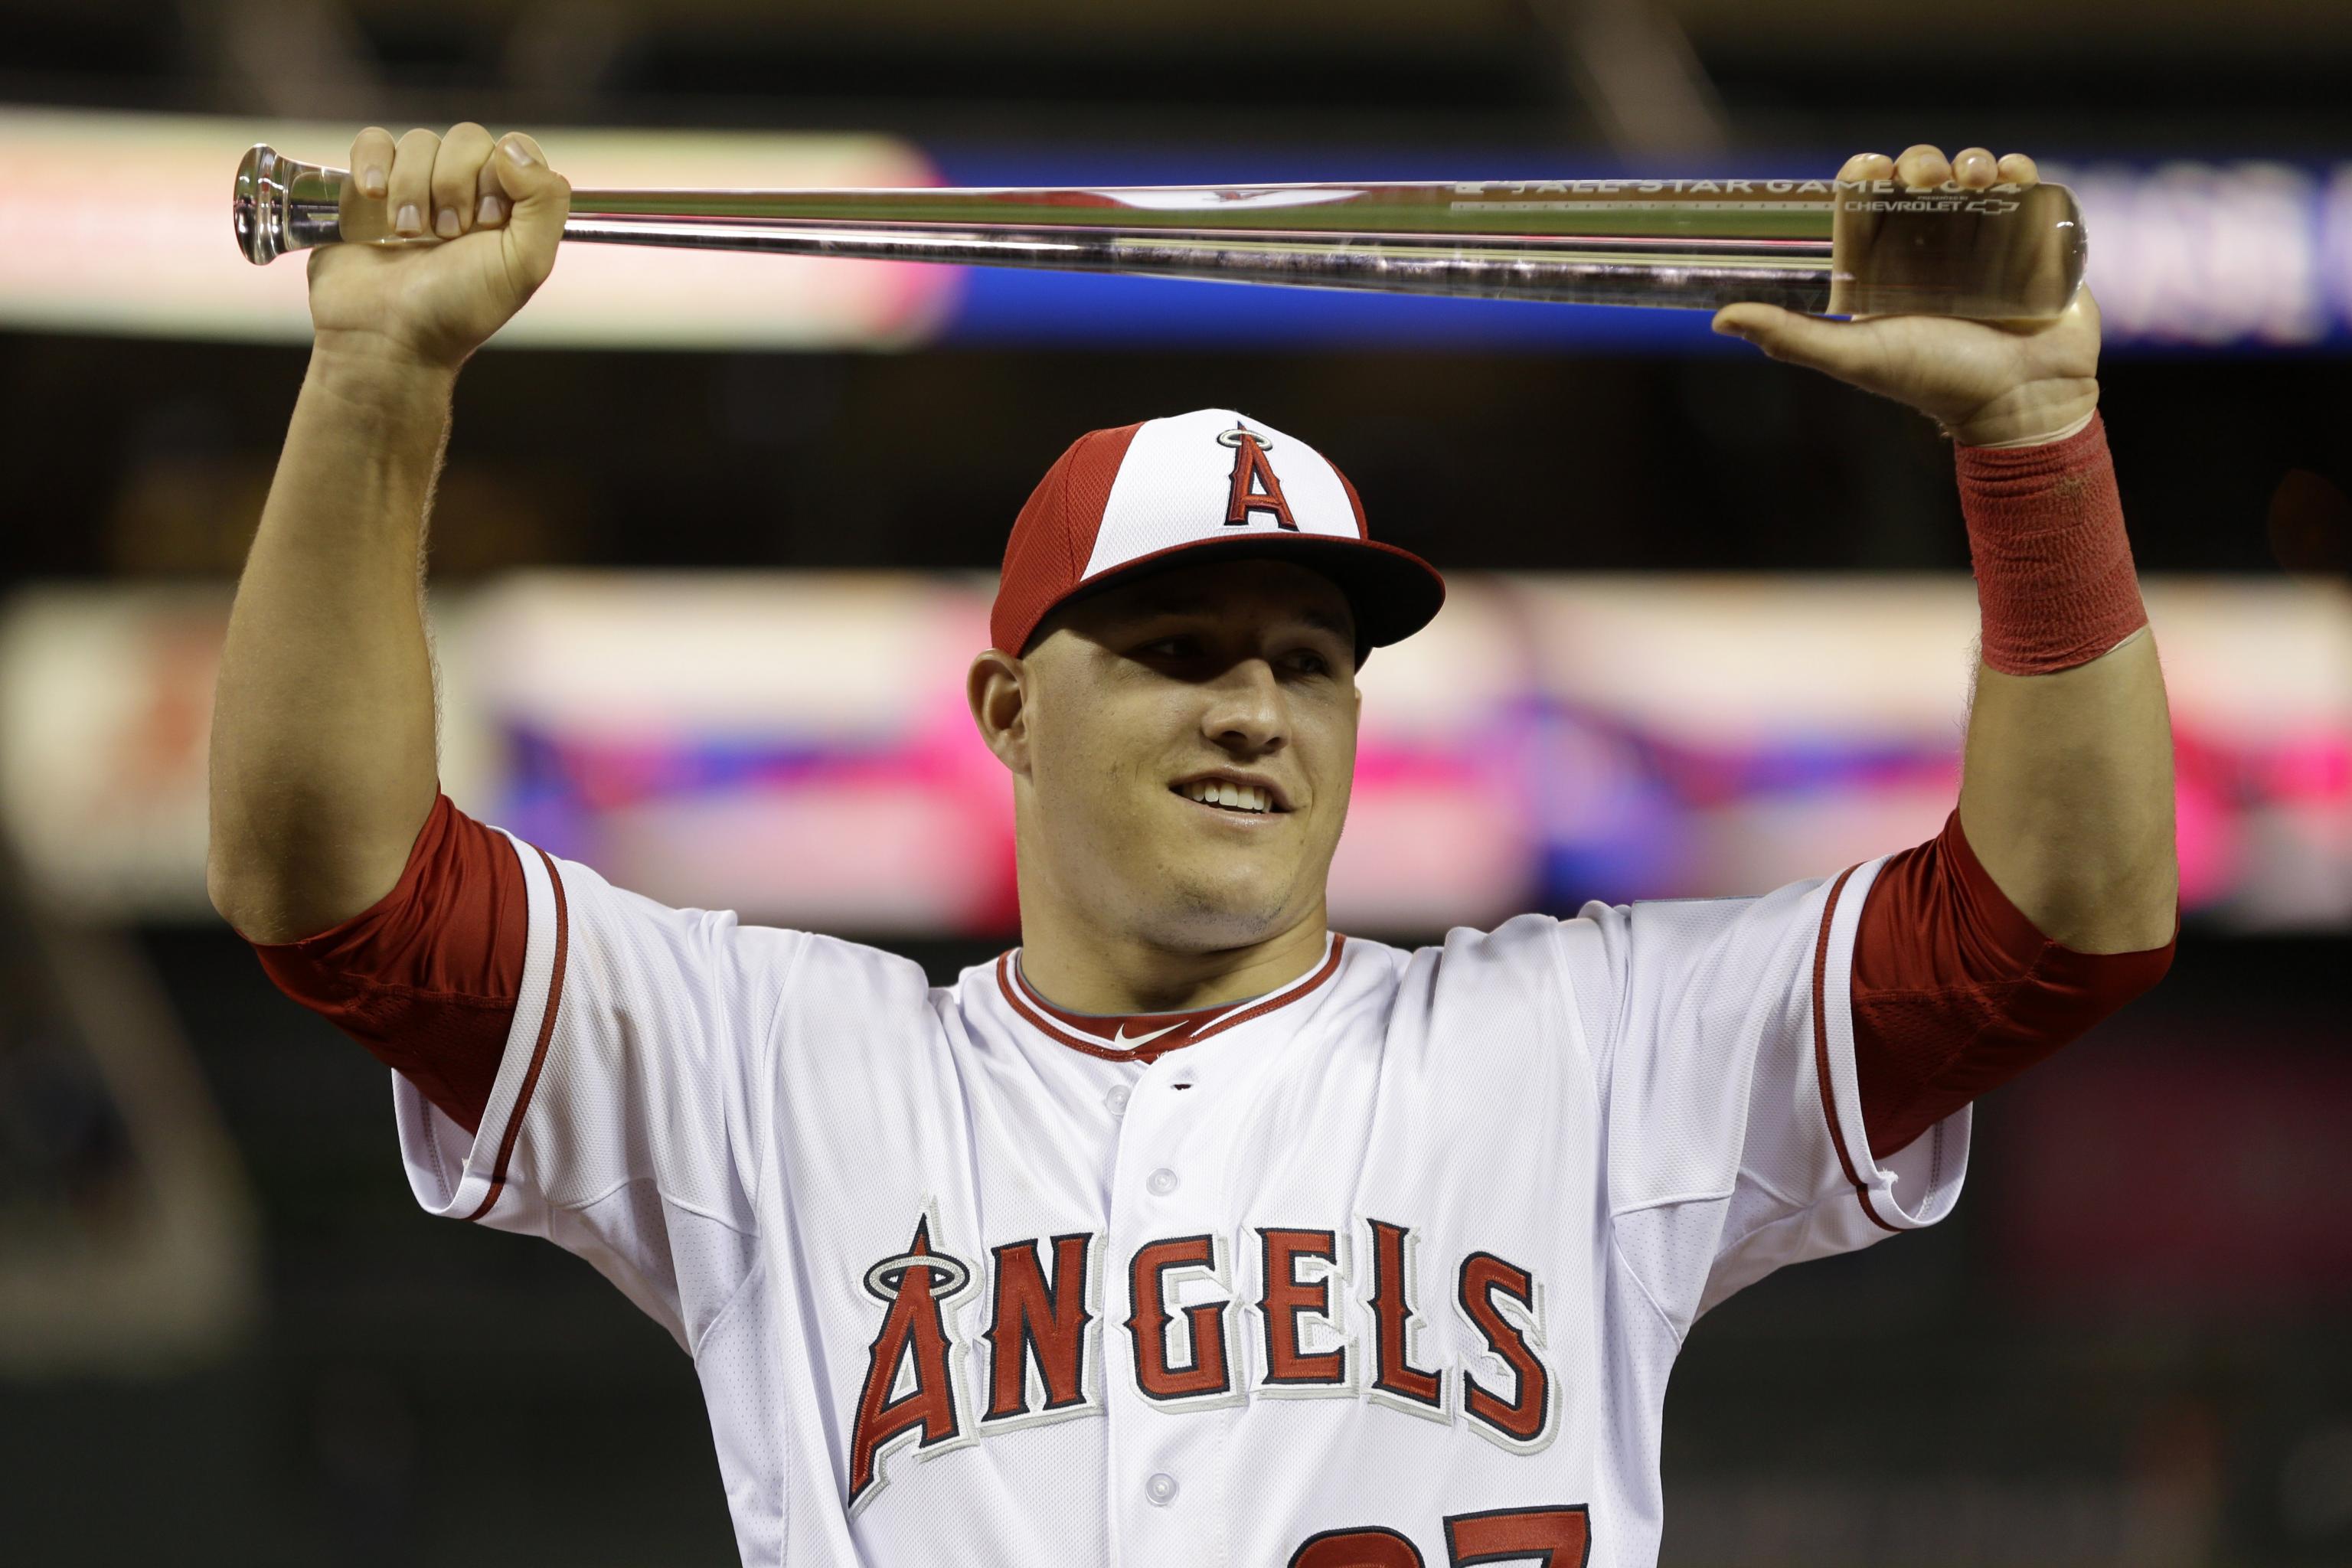 Mike Trout Becomes 1st MLB Player Since Ken Griffey Jr. to Get Own